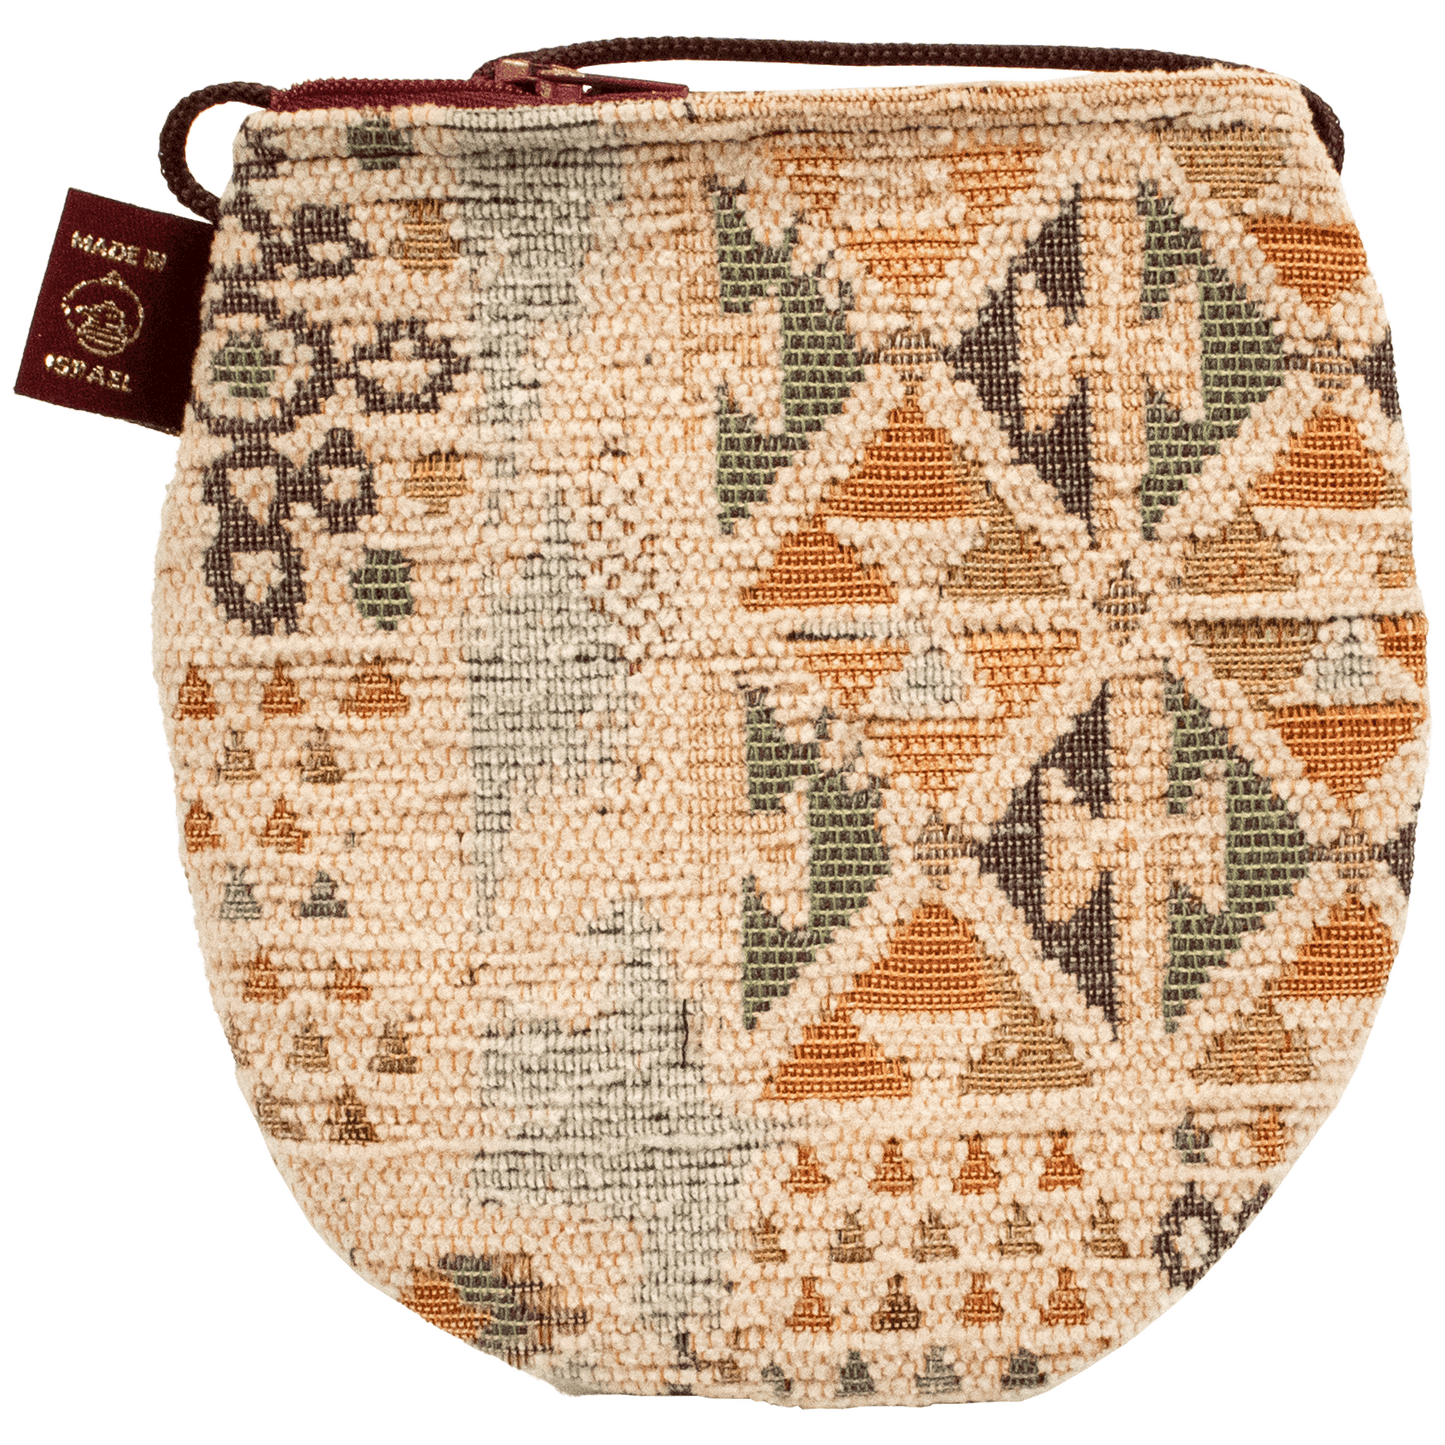 Beige purse with geometric patterns earthy tones and burgundy zipper